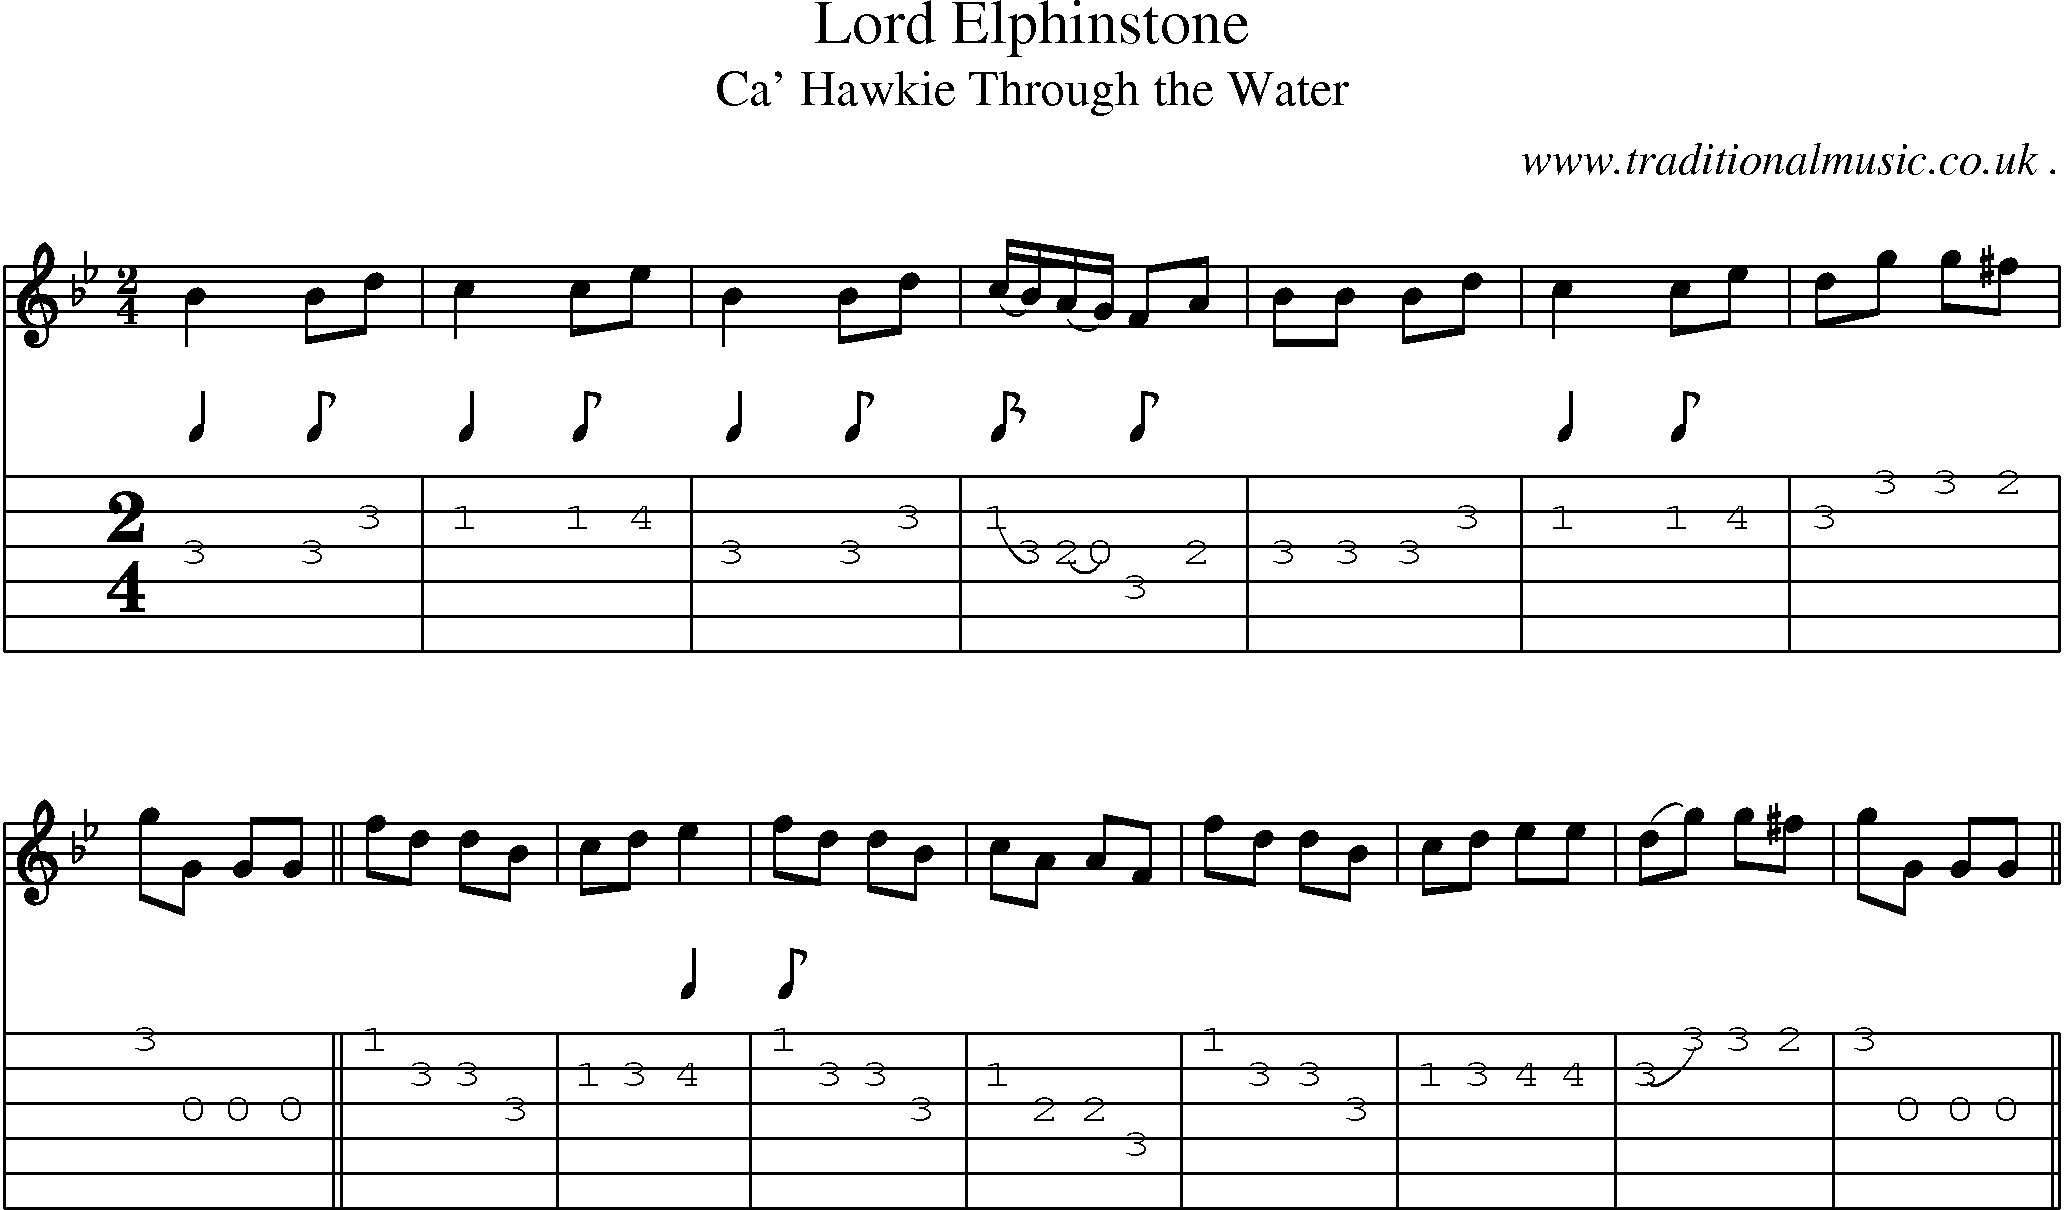 Sheet-music  score, Chords and Guitar Tabs for Lord Elphinstone